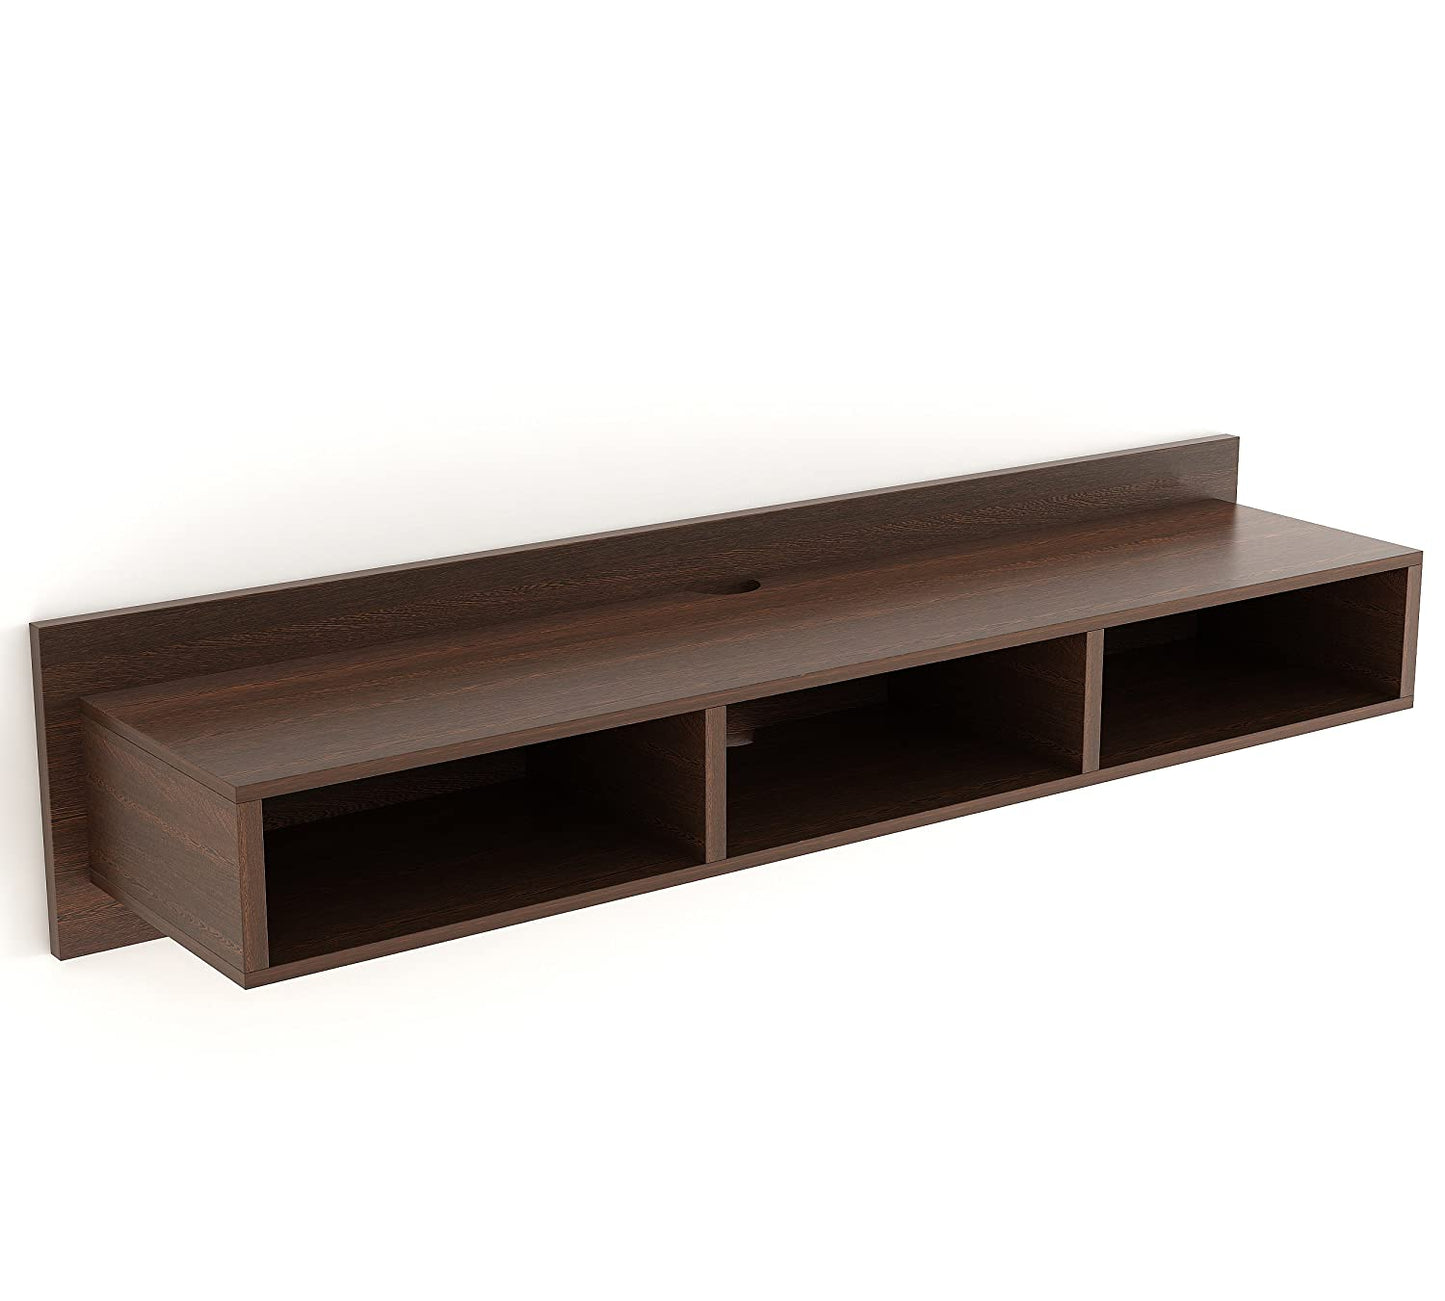 TV Stand: Woober TV Entertainment Unit Table with Set Top Box Stand